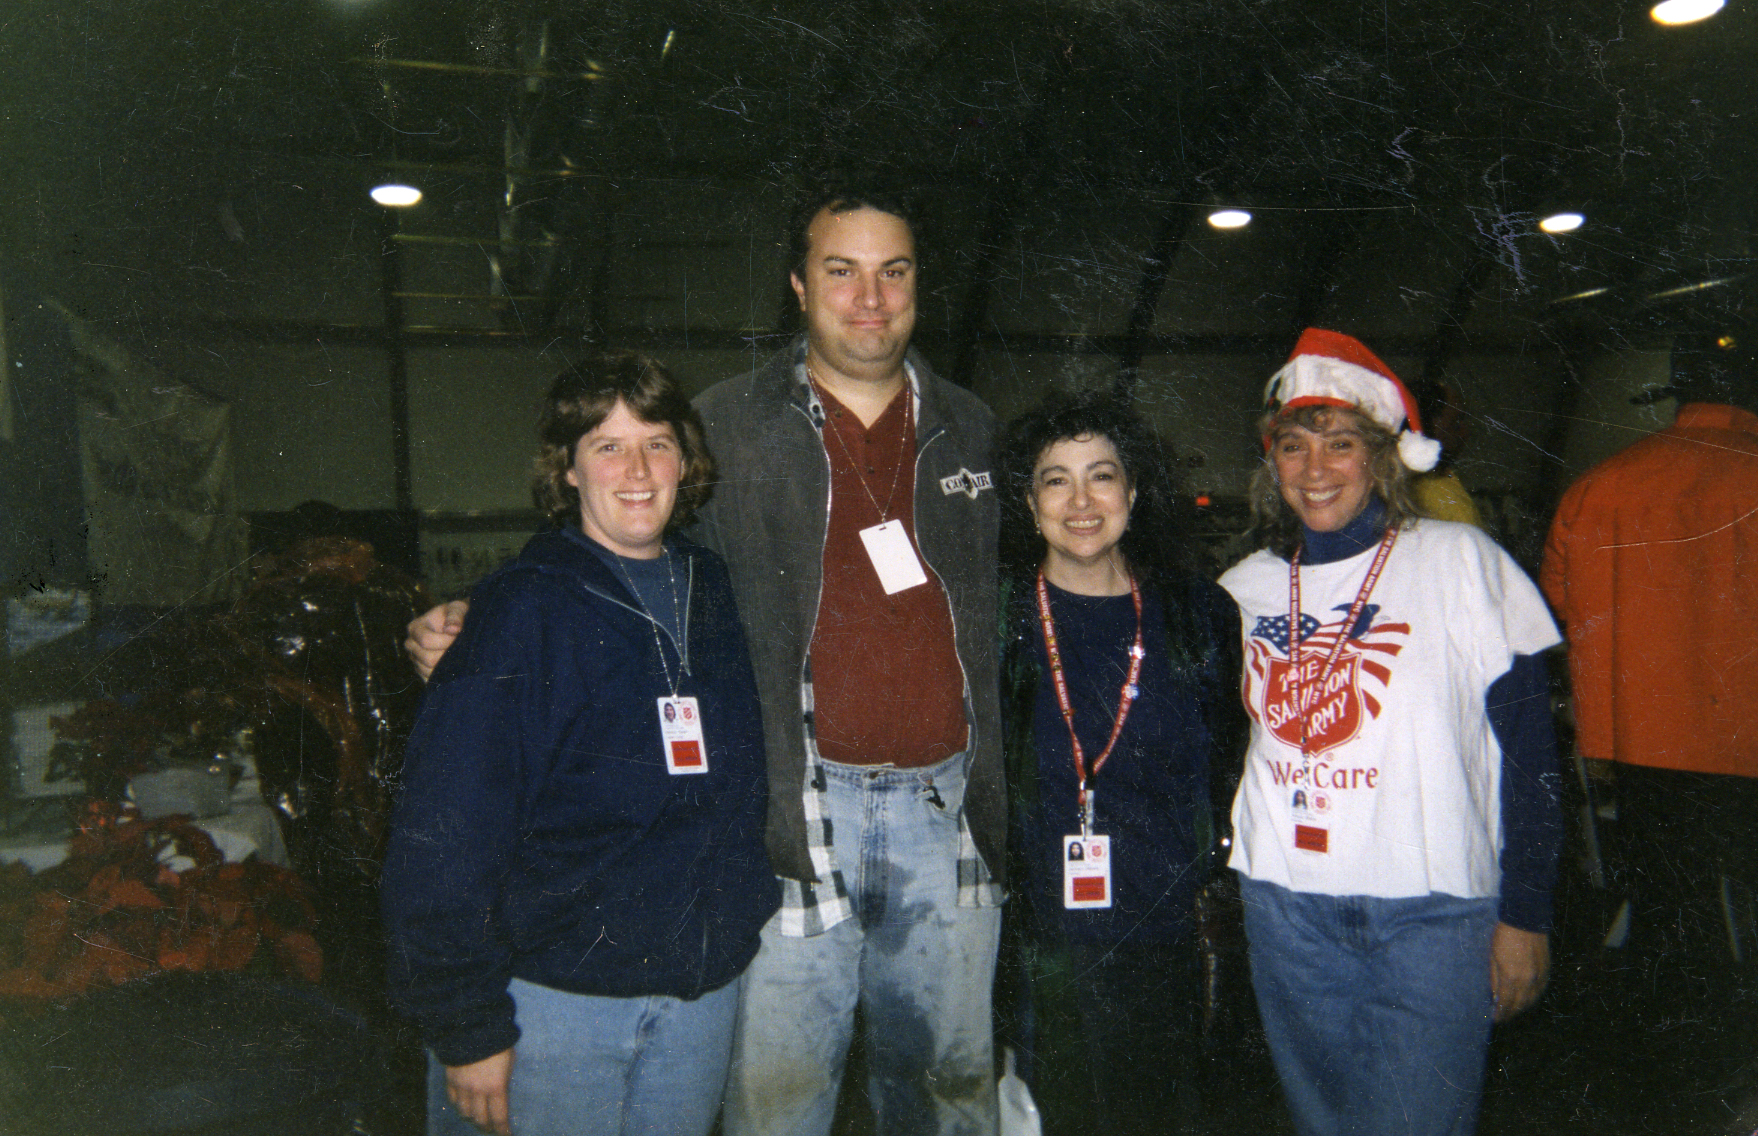 Four Salvation Army volunteers—three women and a man—pose for a photo together at the Salvation Army tent near Ground Zero in December 2001.